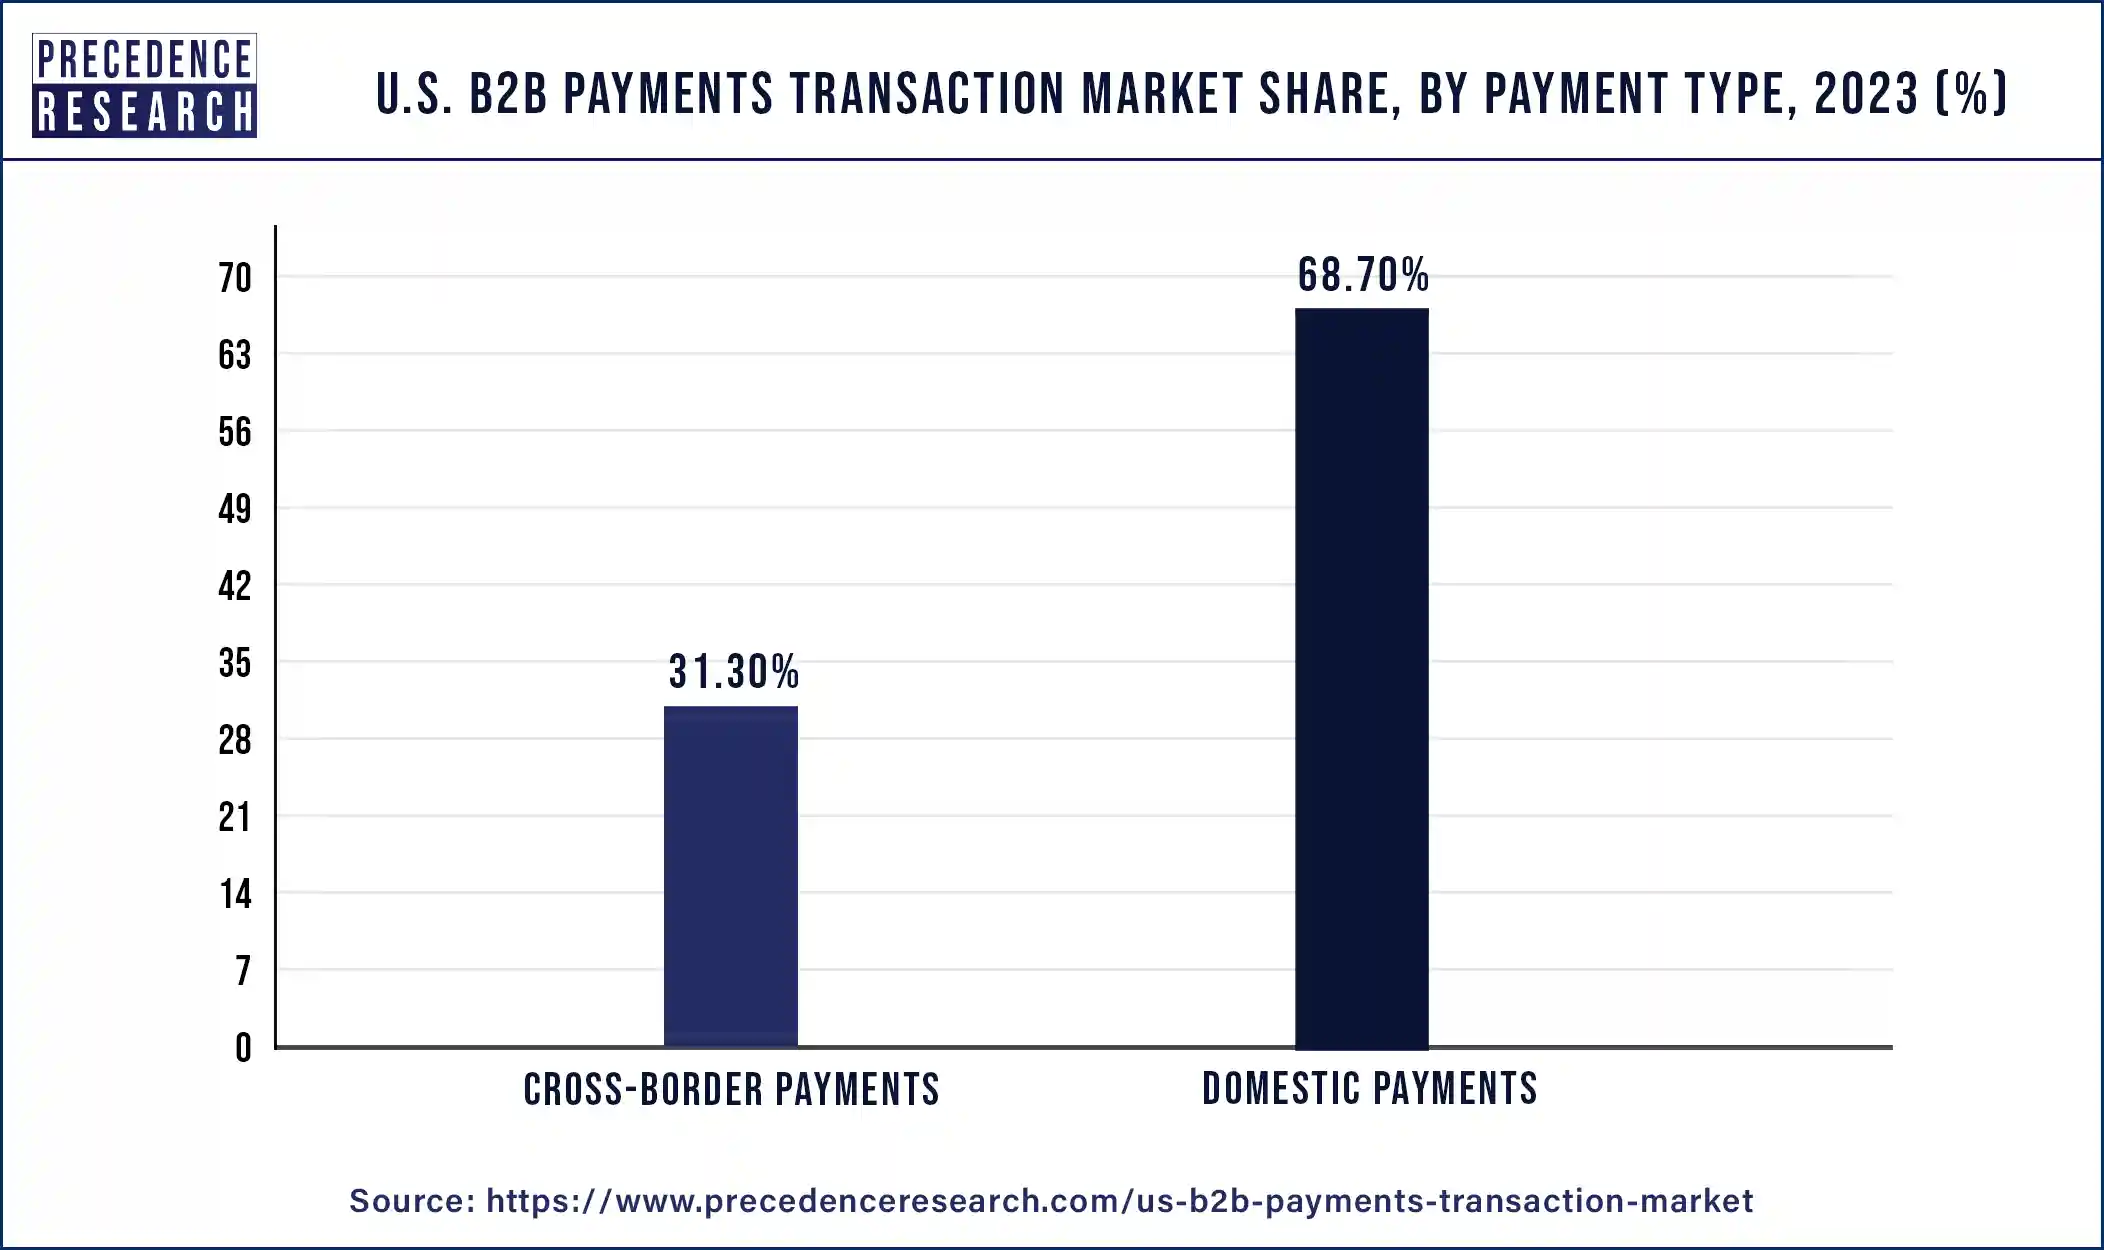 U.S. B2B Payments Transaction Market Share, By Payment Type, 2023 (%)